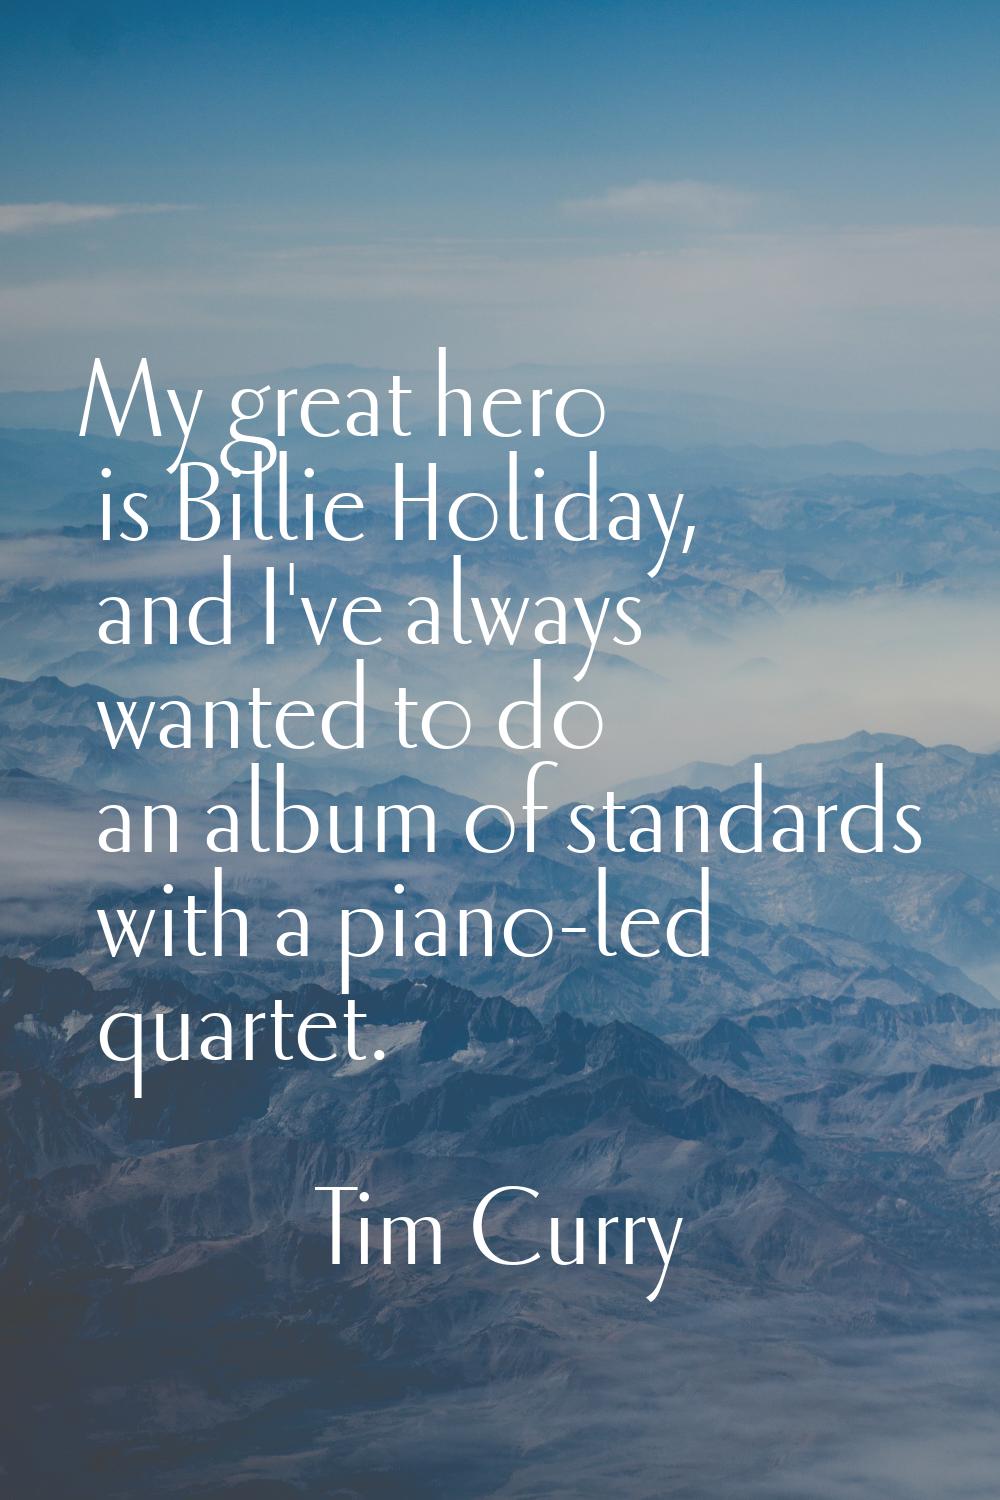 My great hero is Billie Holiday, and I've always wanted to do an album of standards with a piano-le